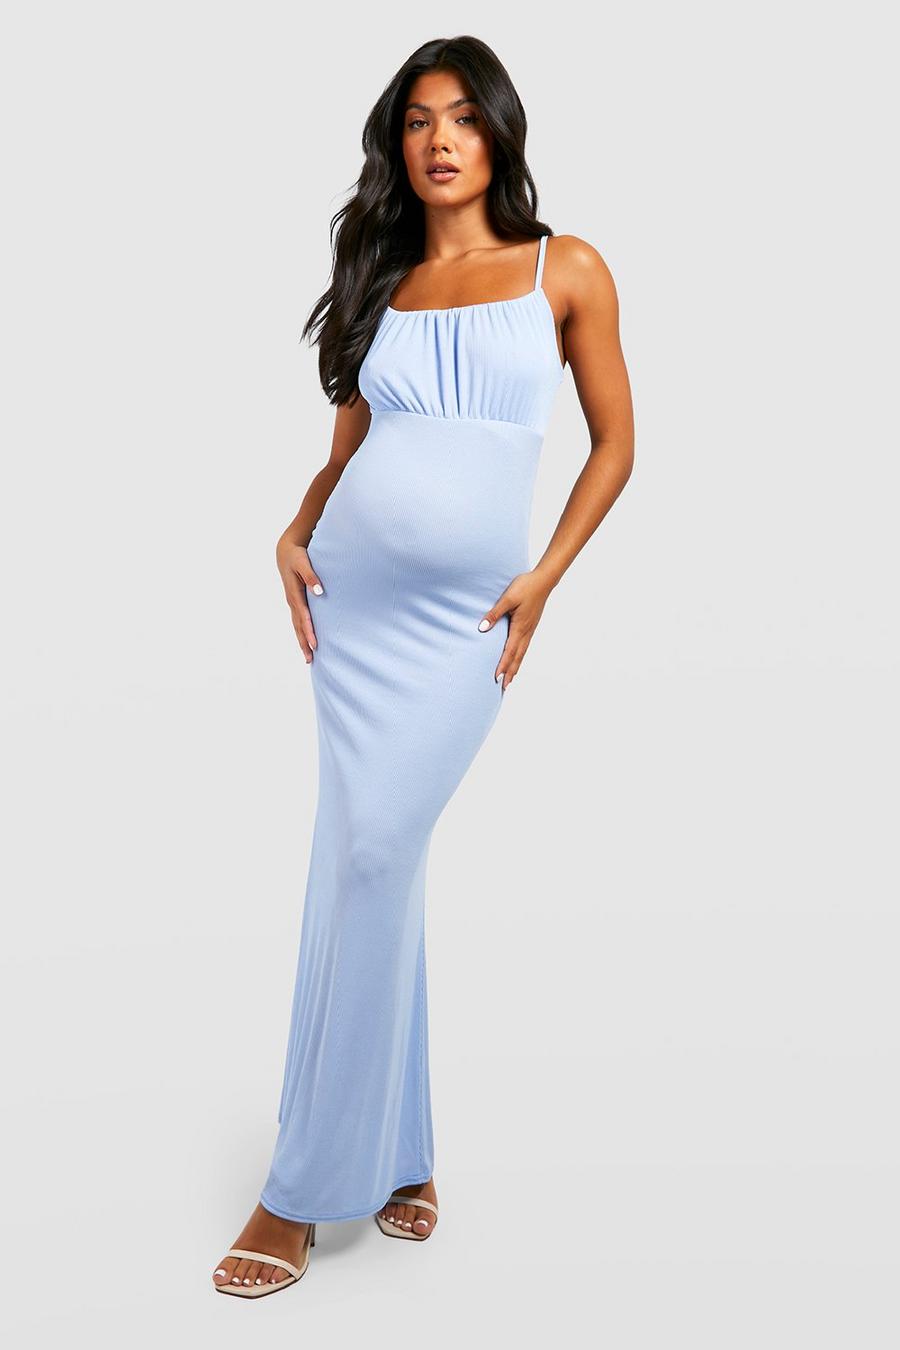 Light blue Maternity Ruched Bust Strappy Maxi Dress